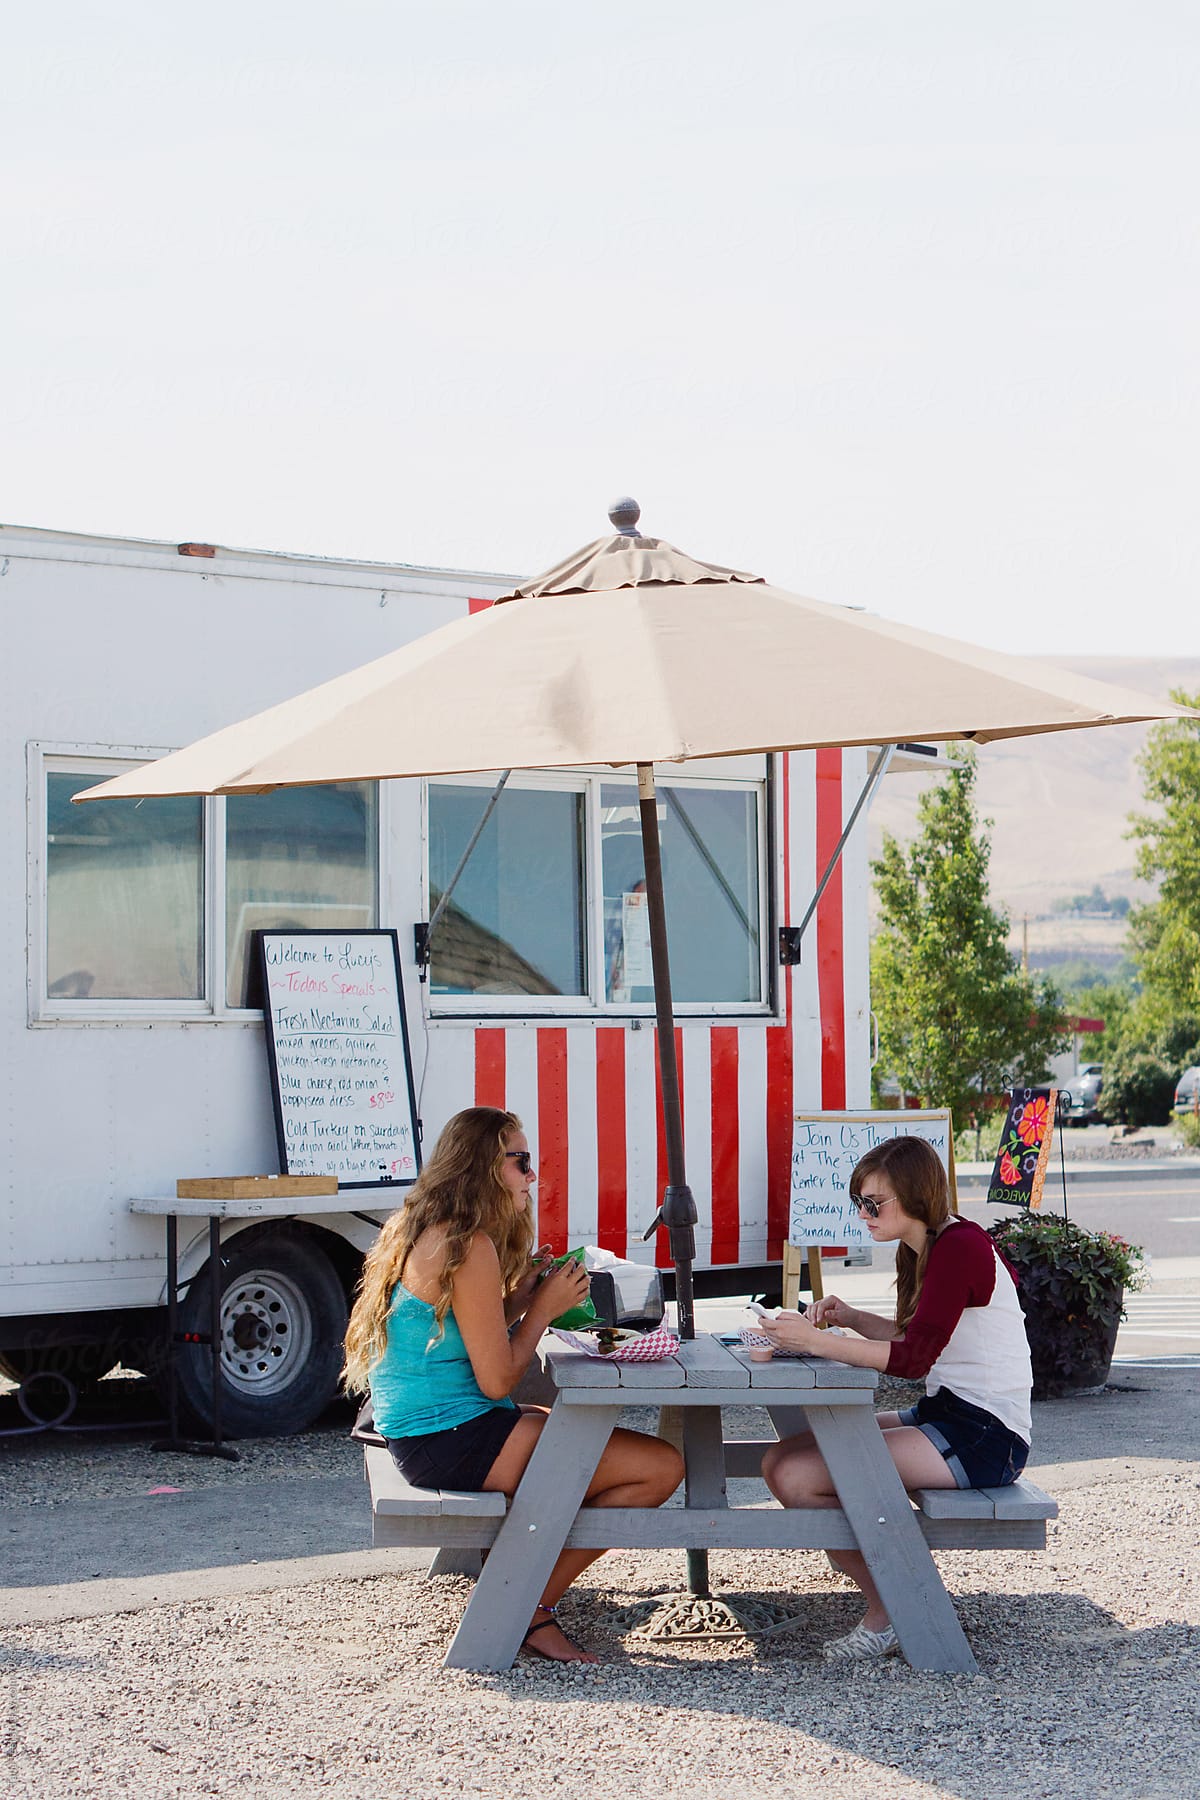 Customers sit at picnic table outside food truck